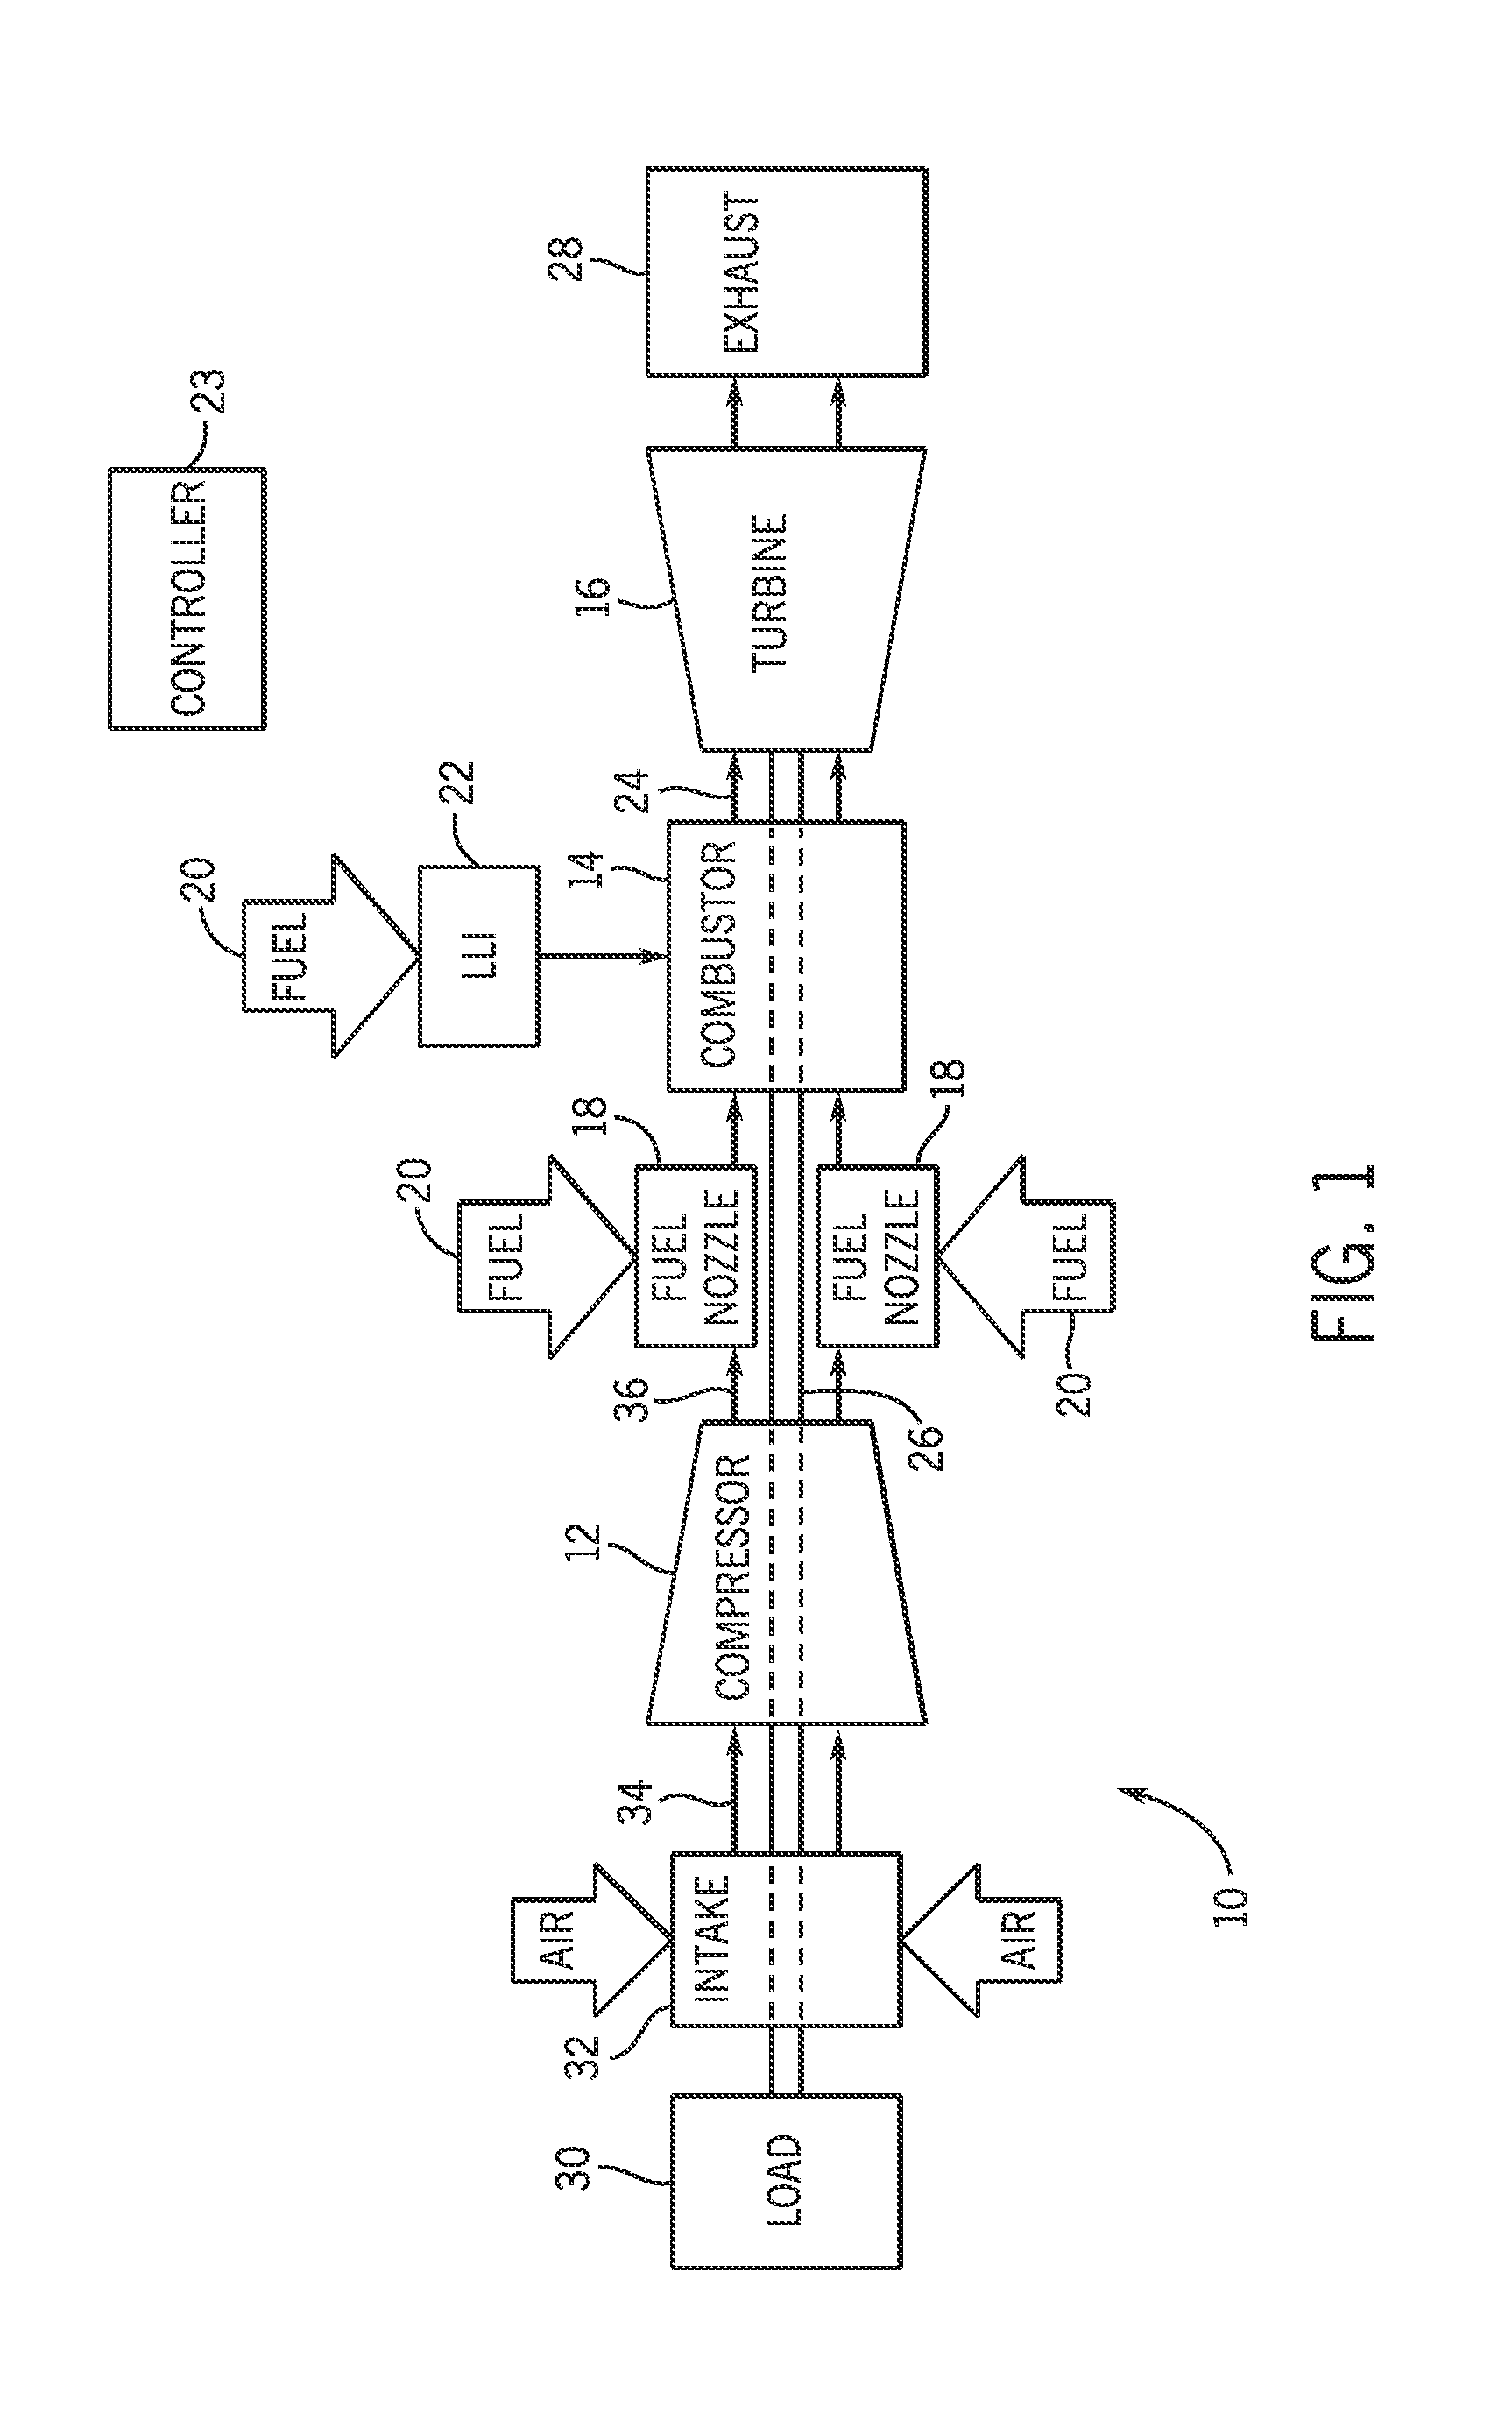 System and method for controlling fuel distributions in a combustor in a gas turbine engine